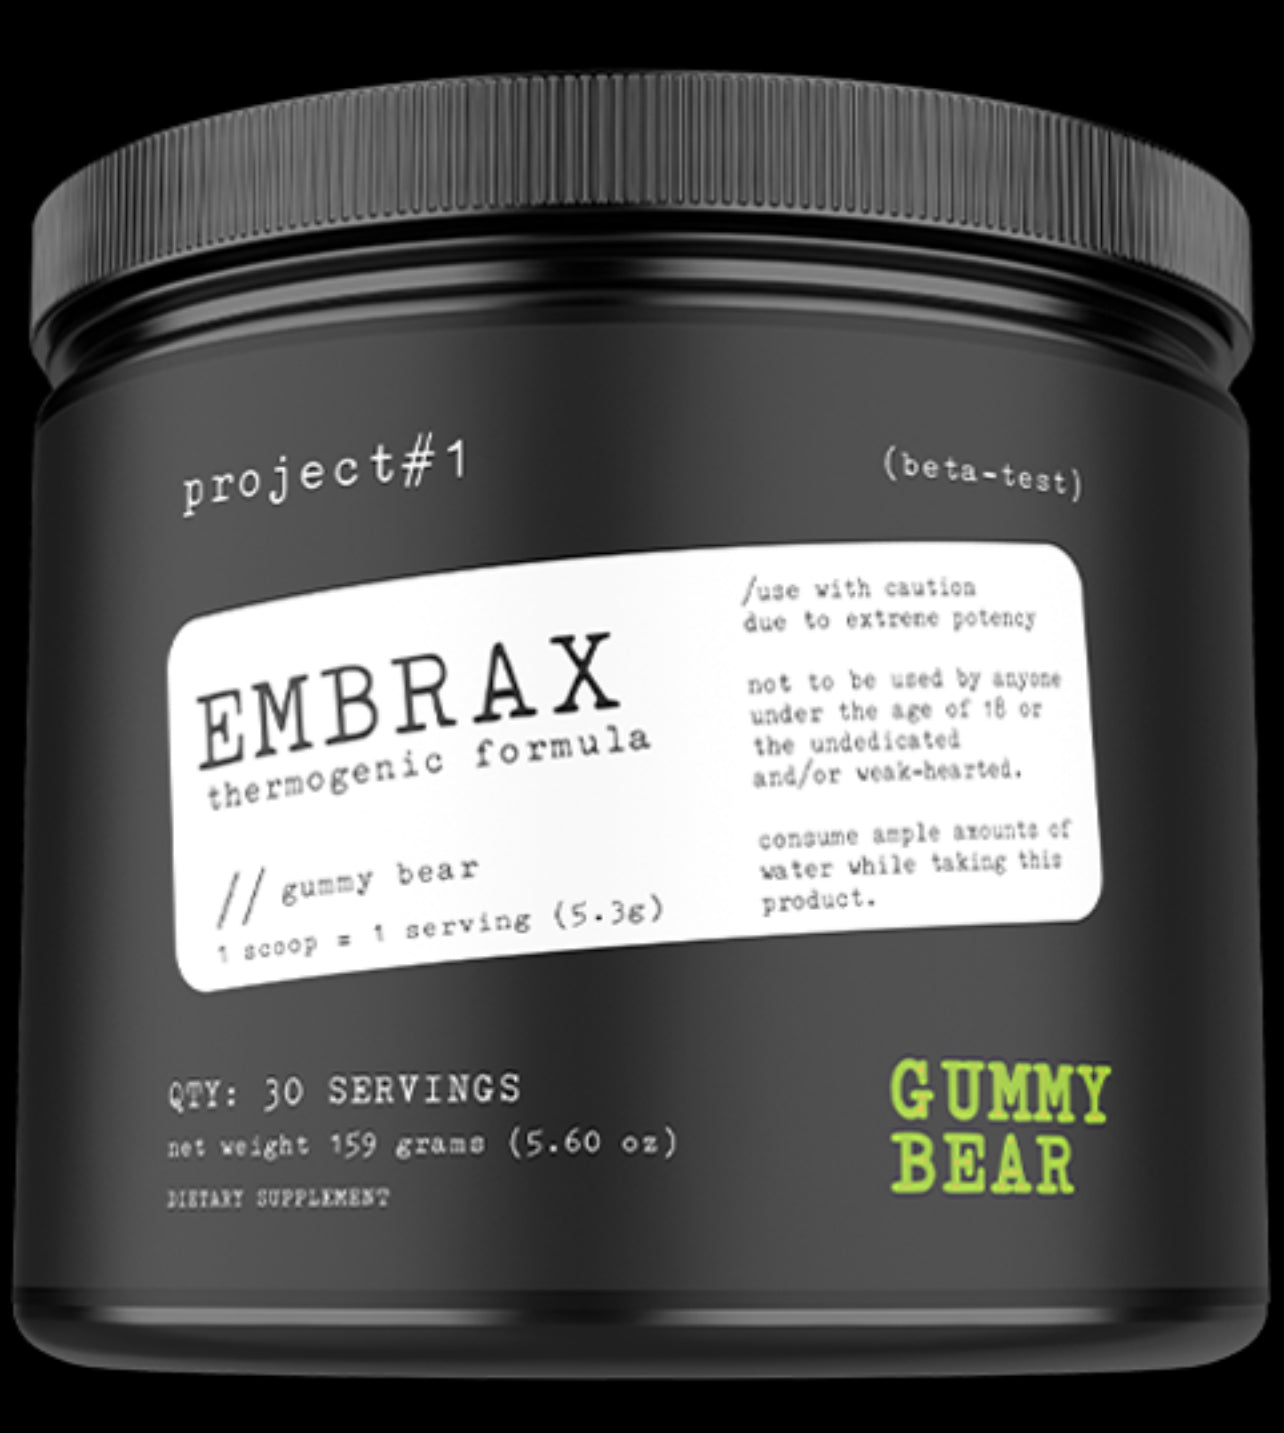 PROJECT # 1 EMBRAX